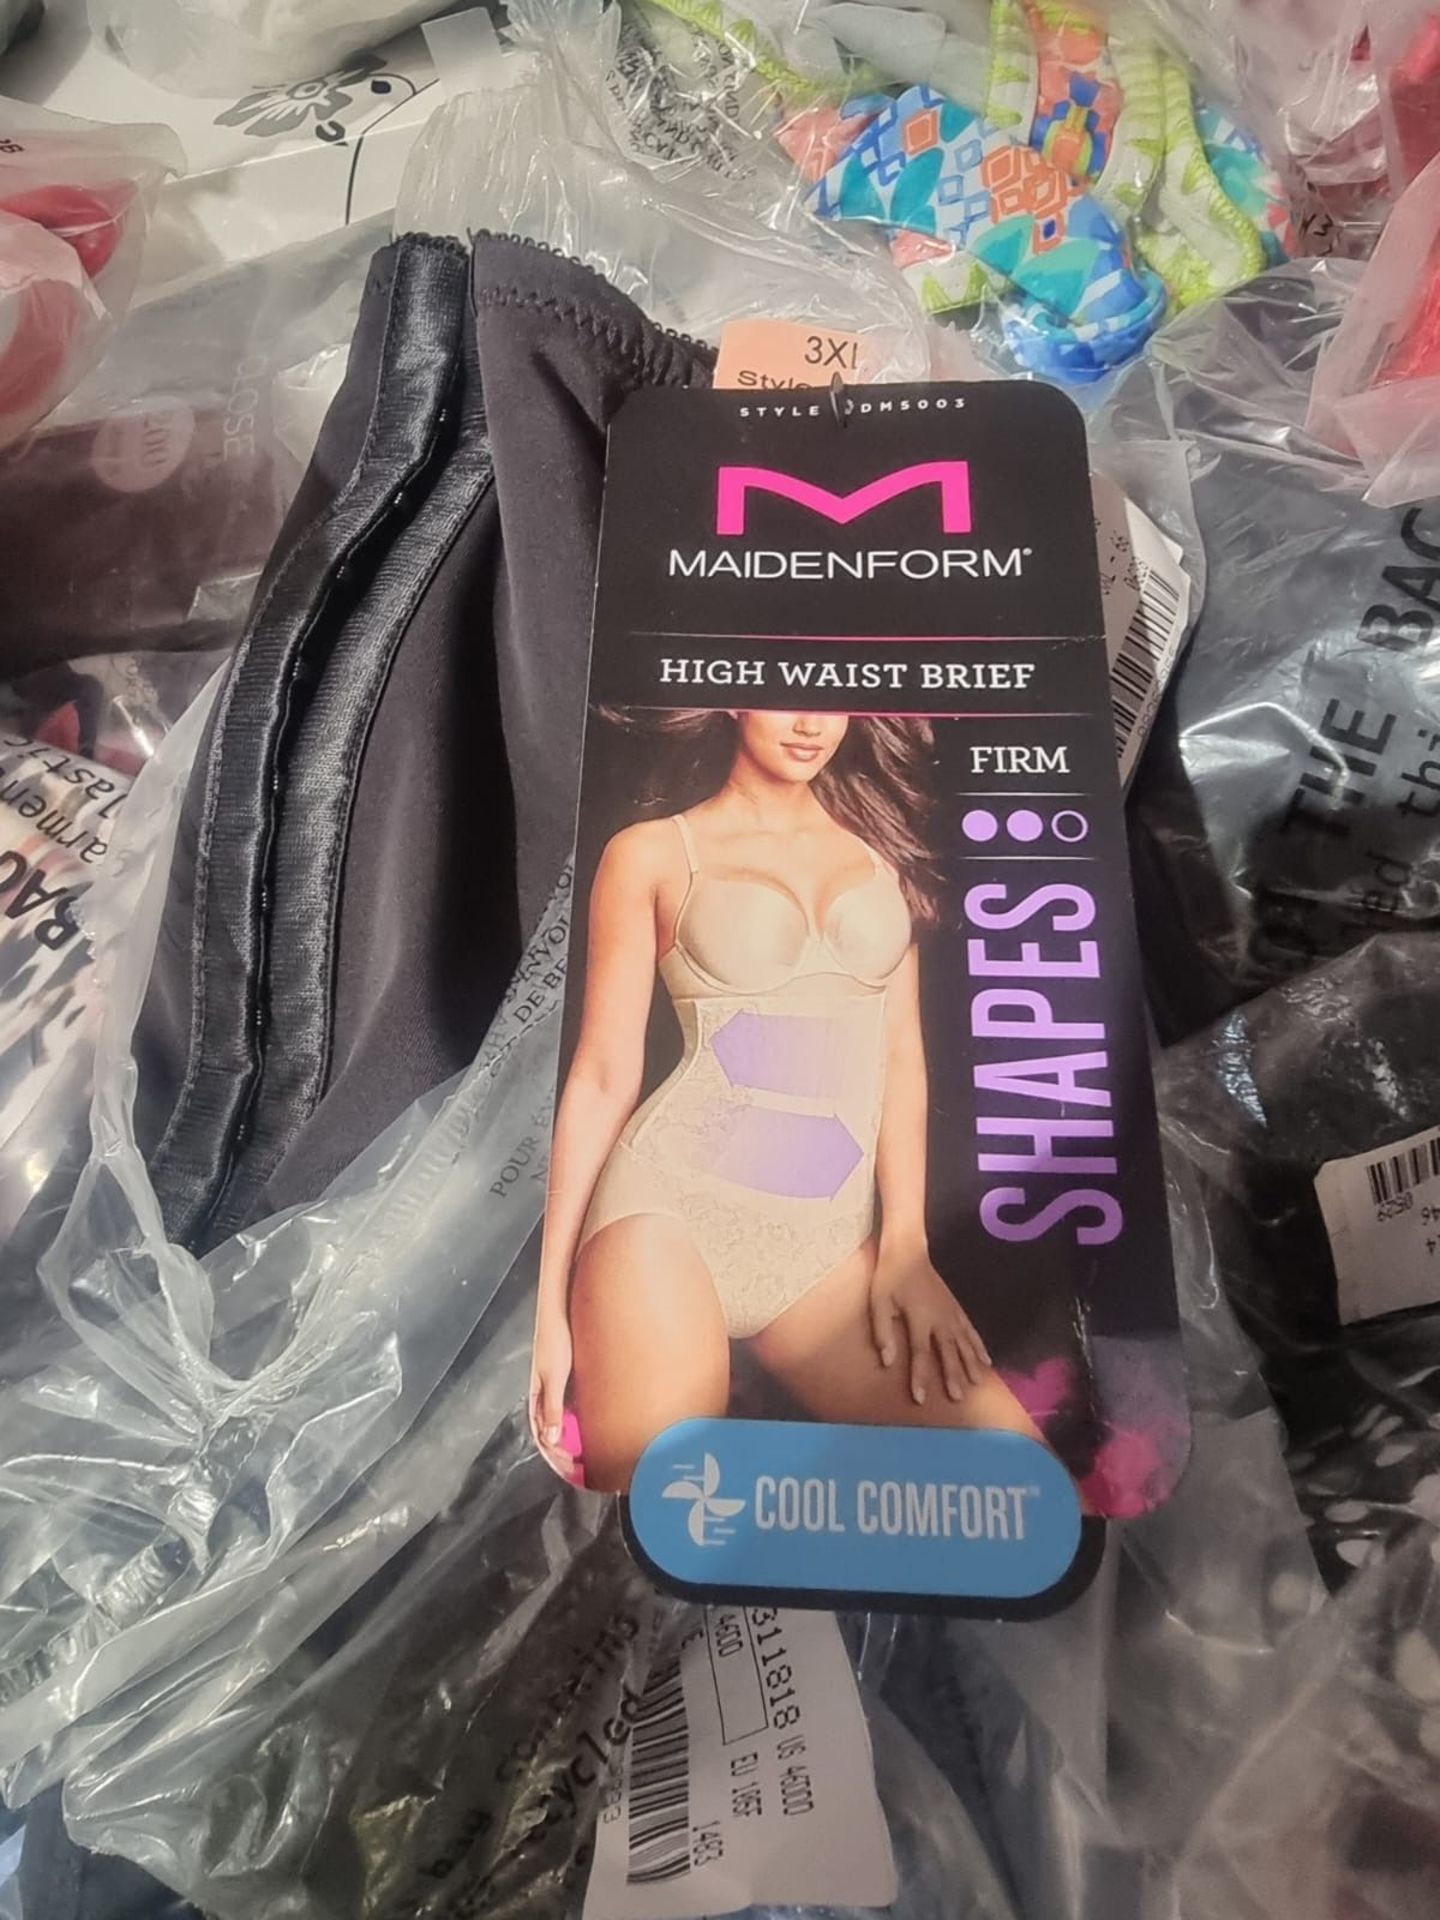 100 x NEW PACKAGED ASSORTED SWIM & UNDERWEAR FROM BRAND SUCH AS WONDERBRA, BOUX AVENUE, ANN SUMMERS, - Image 18 of 106